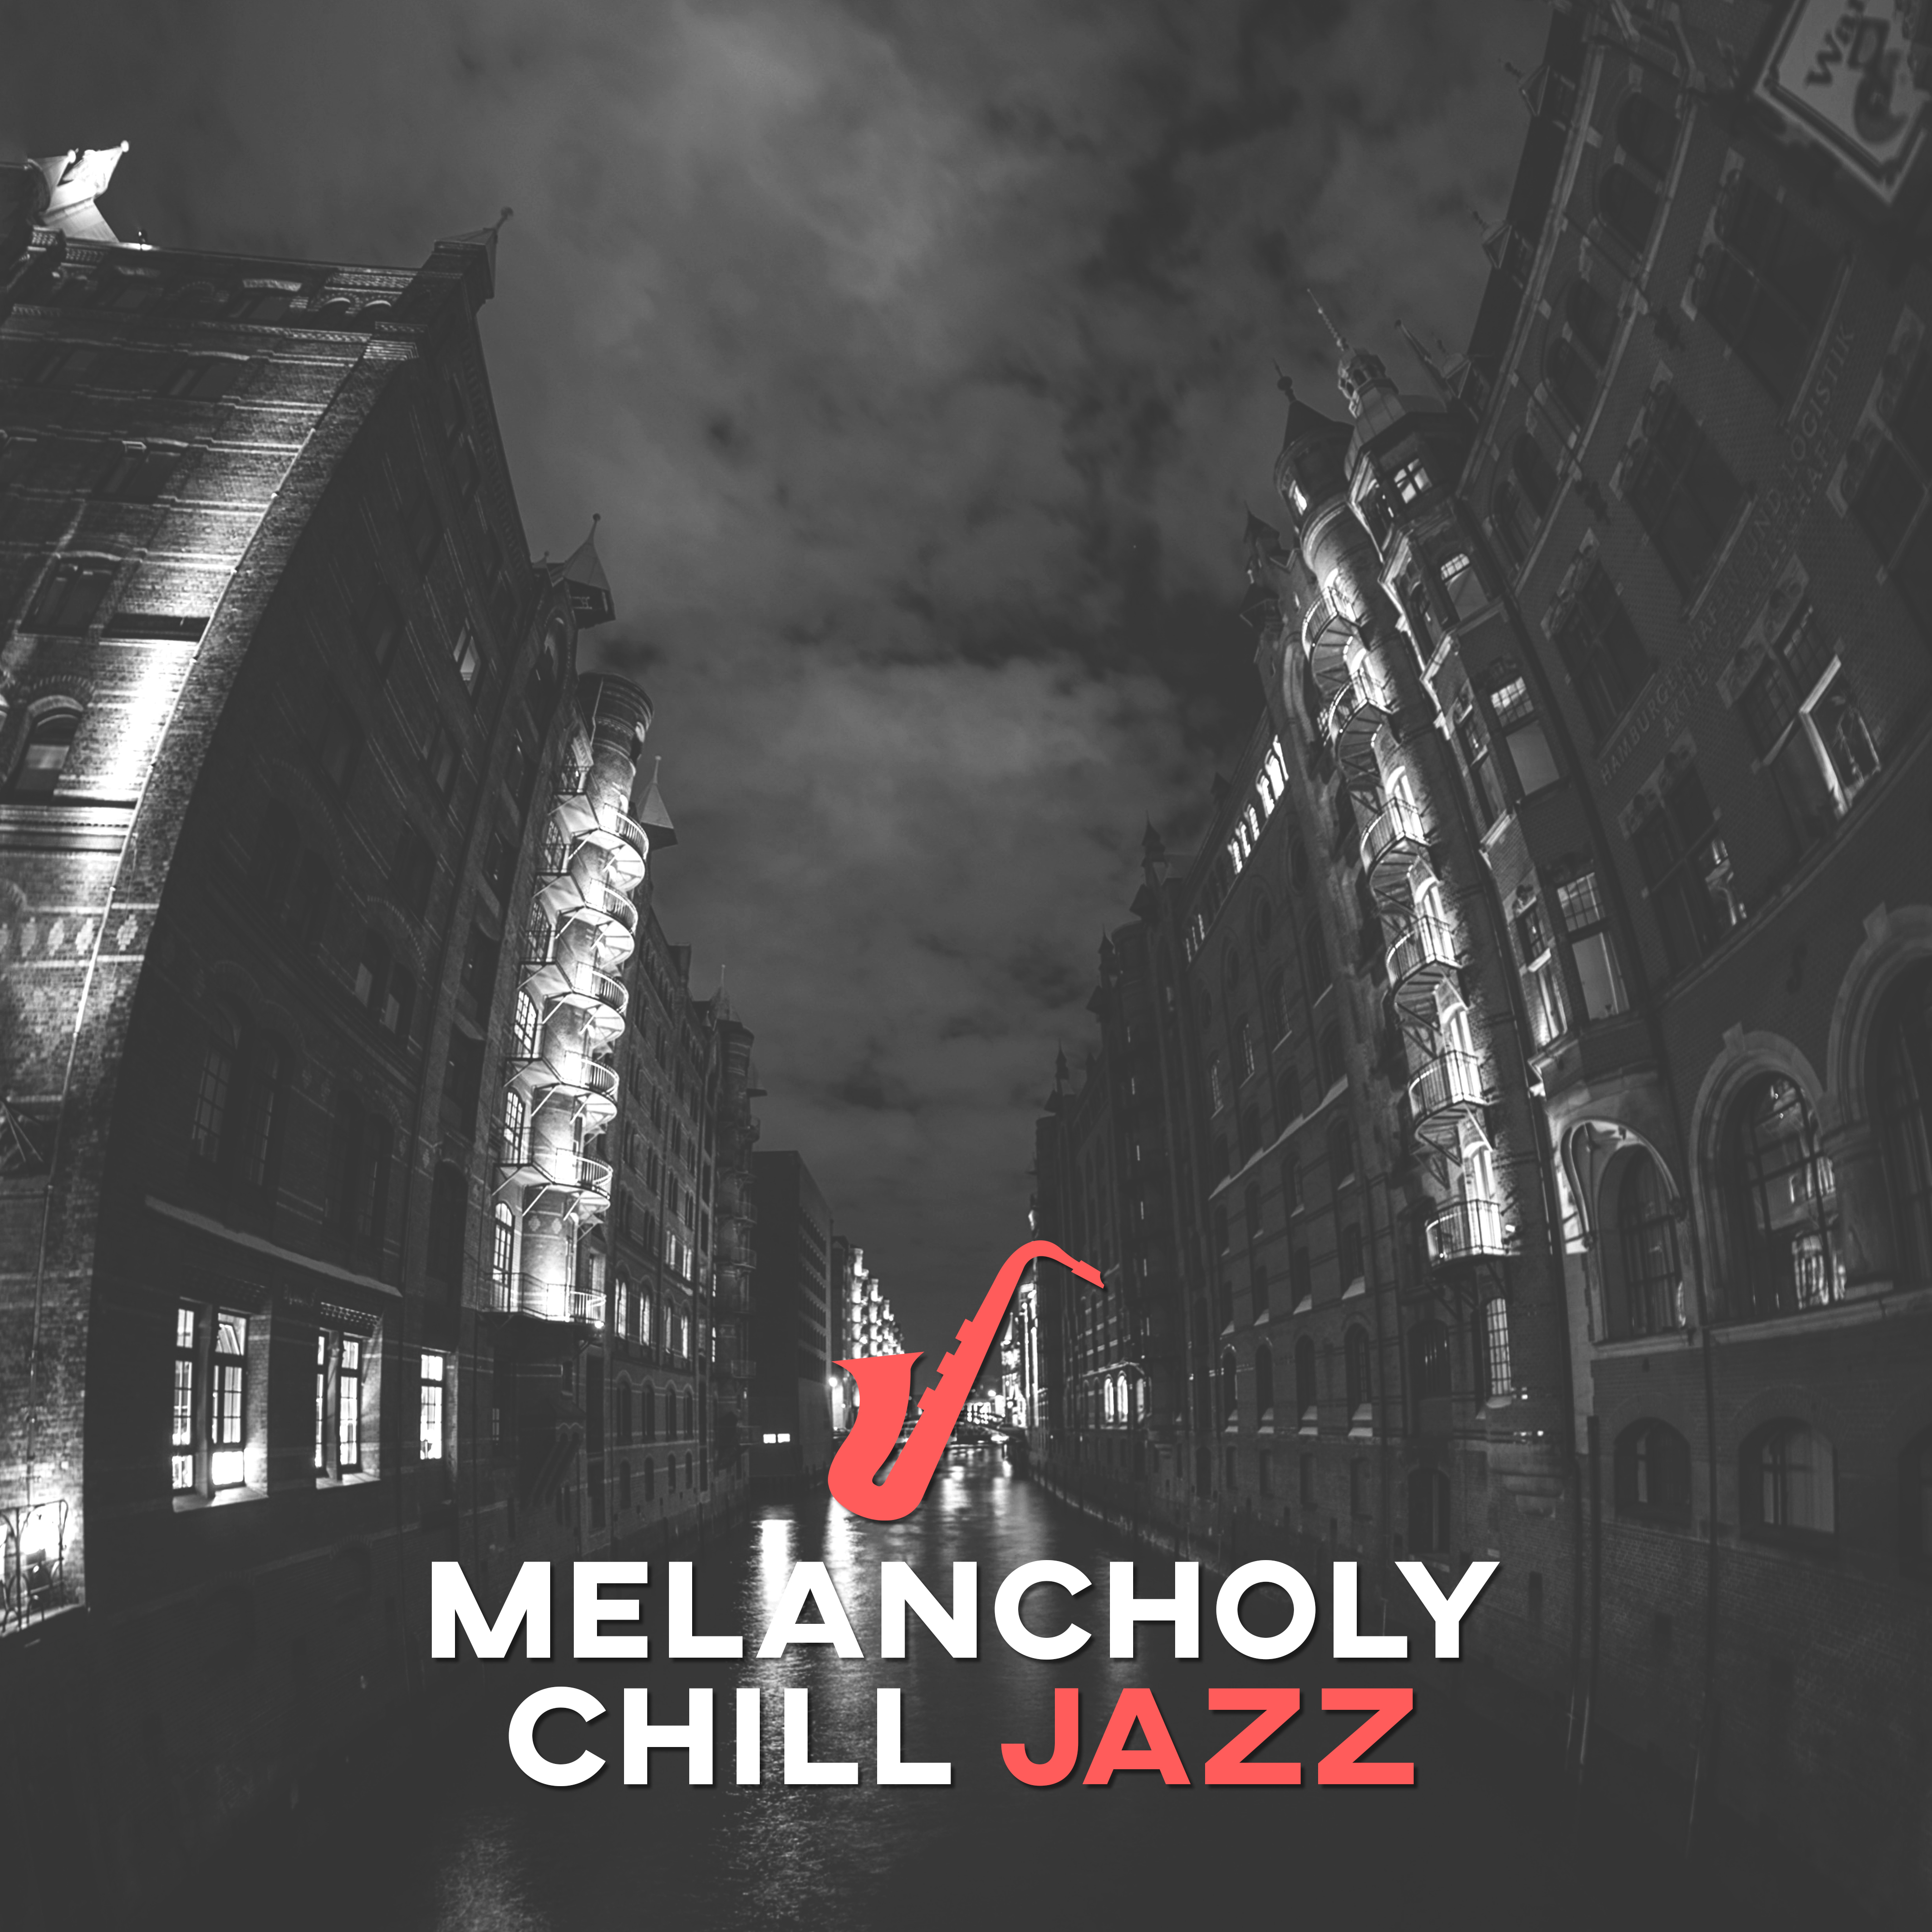 Melancholy Chill Jazz  Smooth Jazz Music, Instrumental Piano, Relaxing Time, Mellow Jazz Music for Jazz Club  Bar